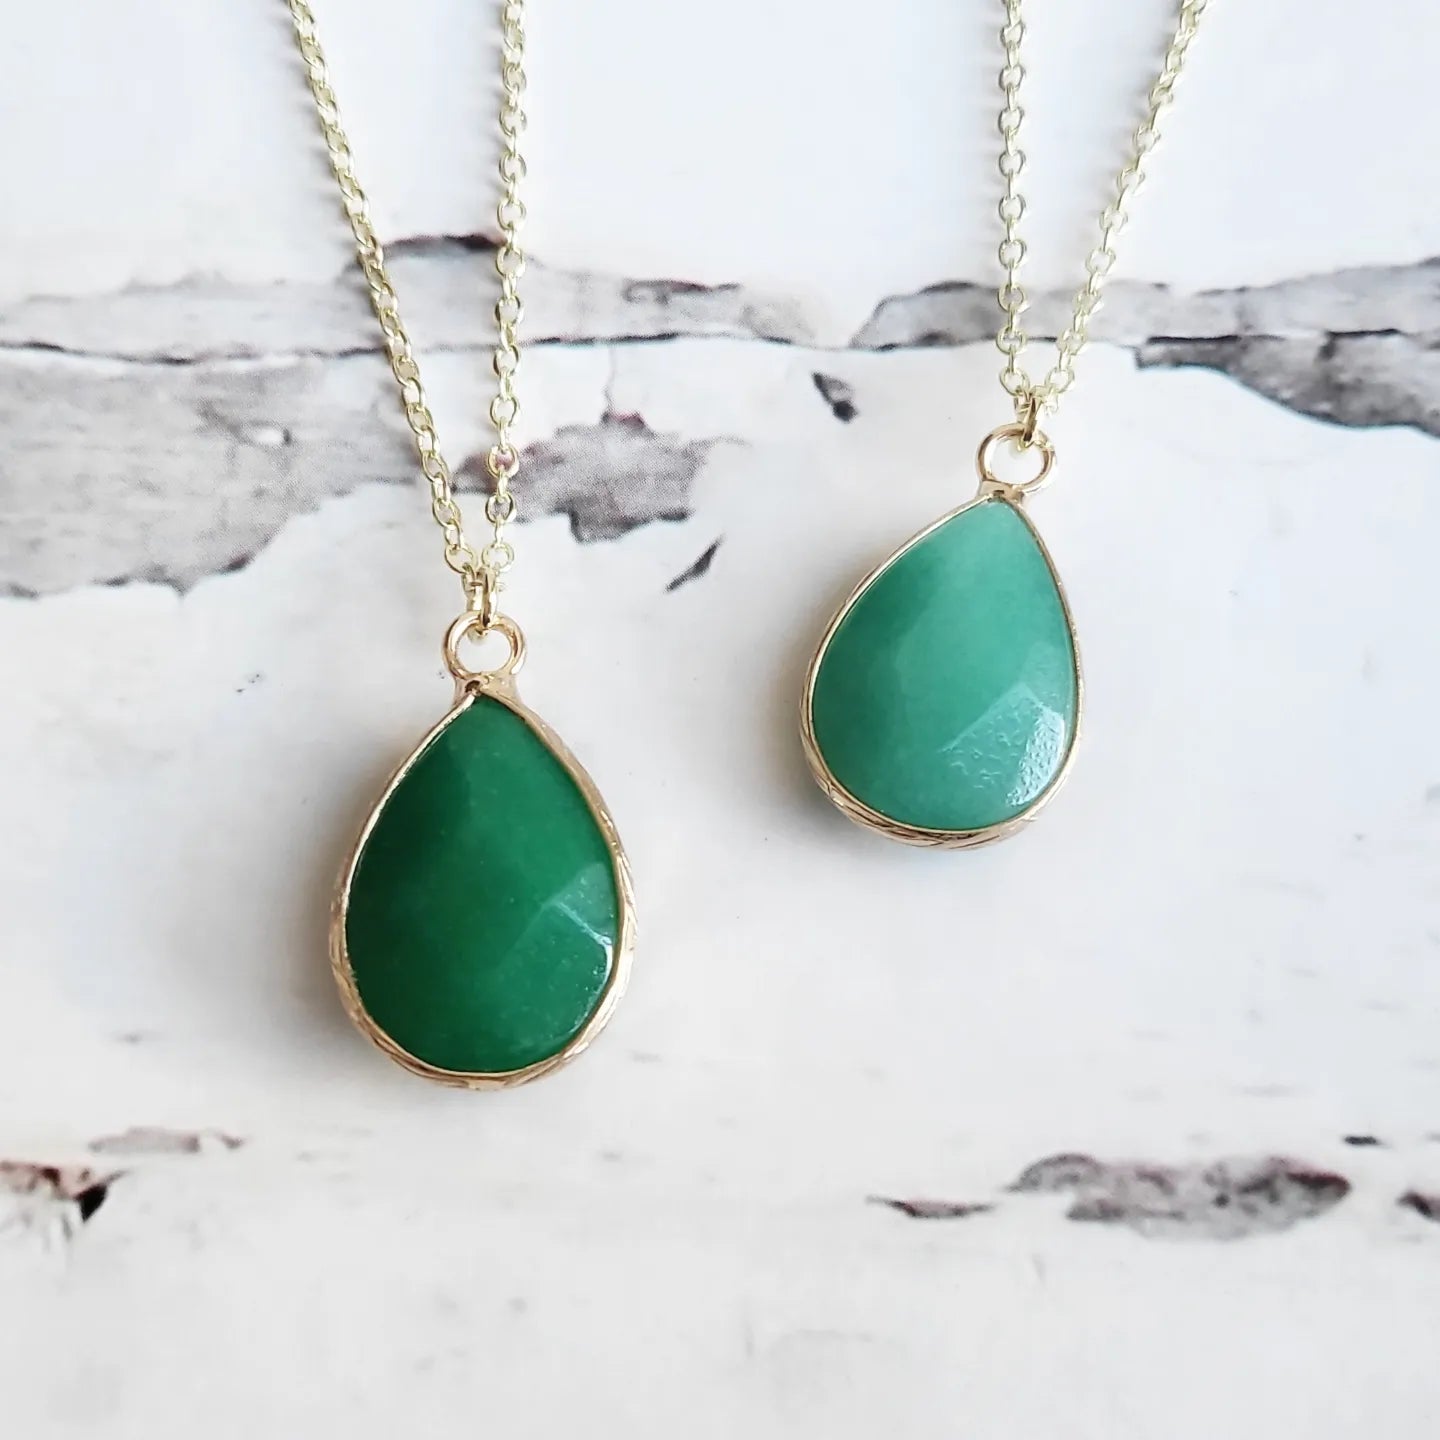 JADE | Good Fortune, Abundance & Manifestation | Gold Cable Chain Pendant Necklace | Intention Crystal | Healing Spiritual Gift for Her